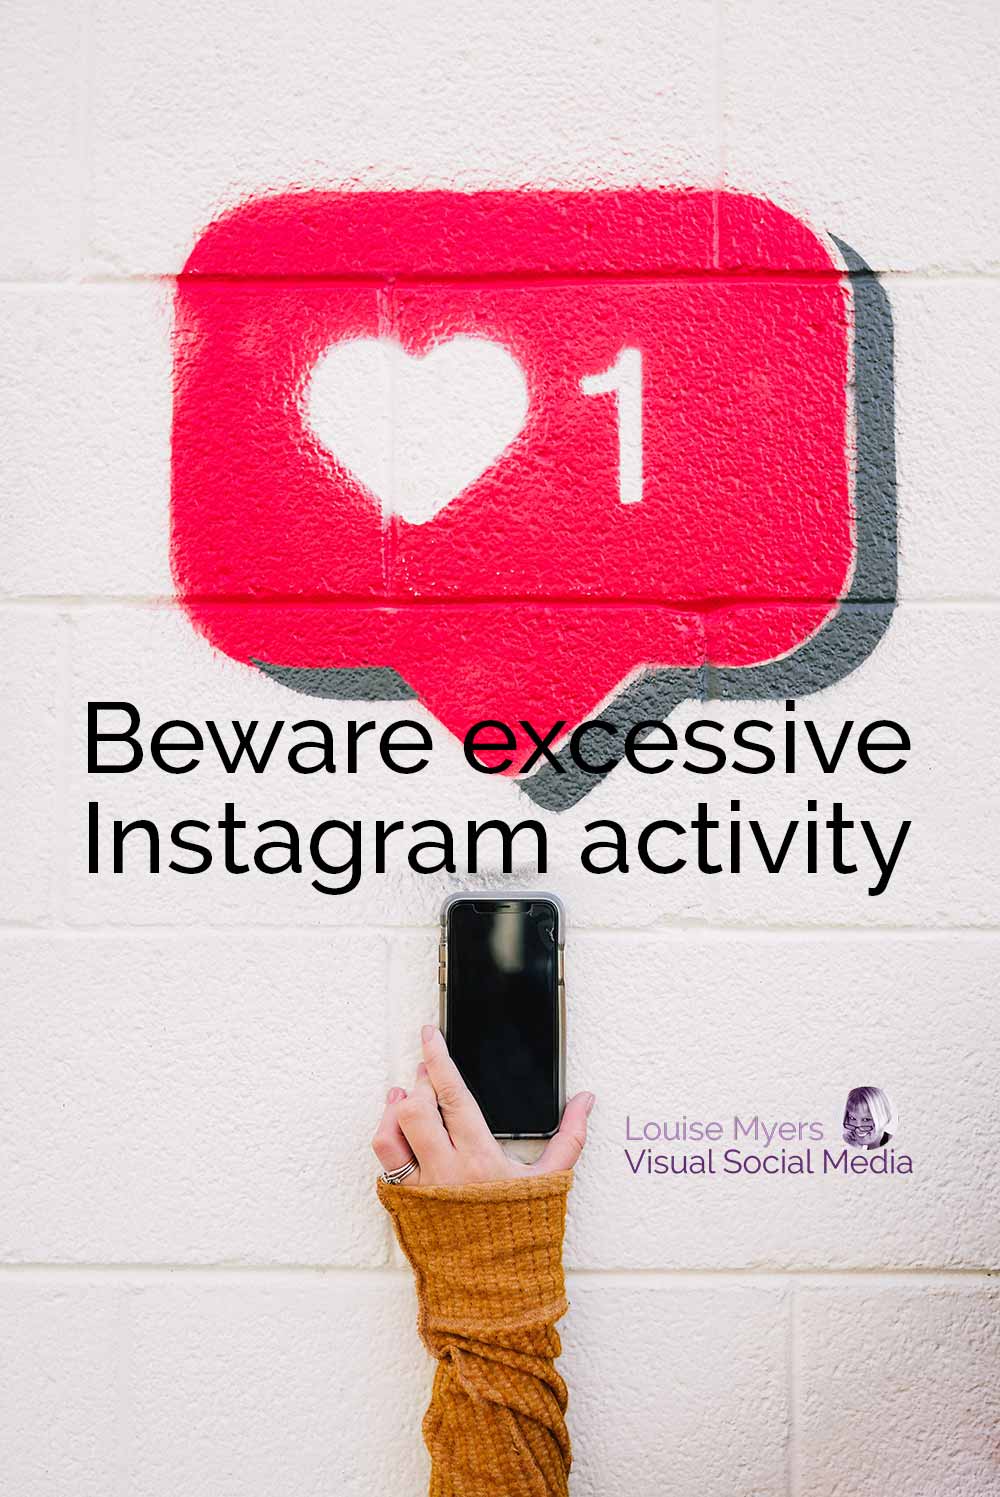 hand holds phone up to instagram like icon on wall with text beware excessive activity.